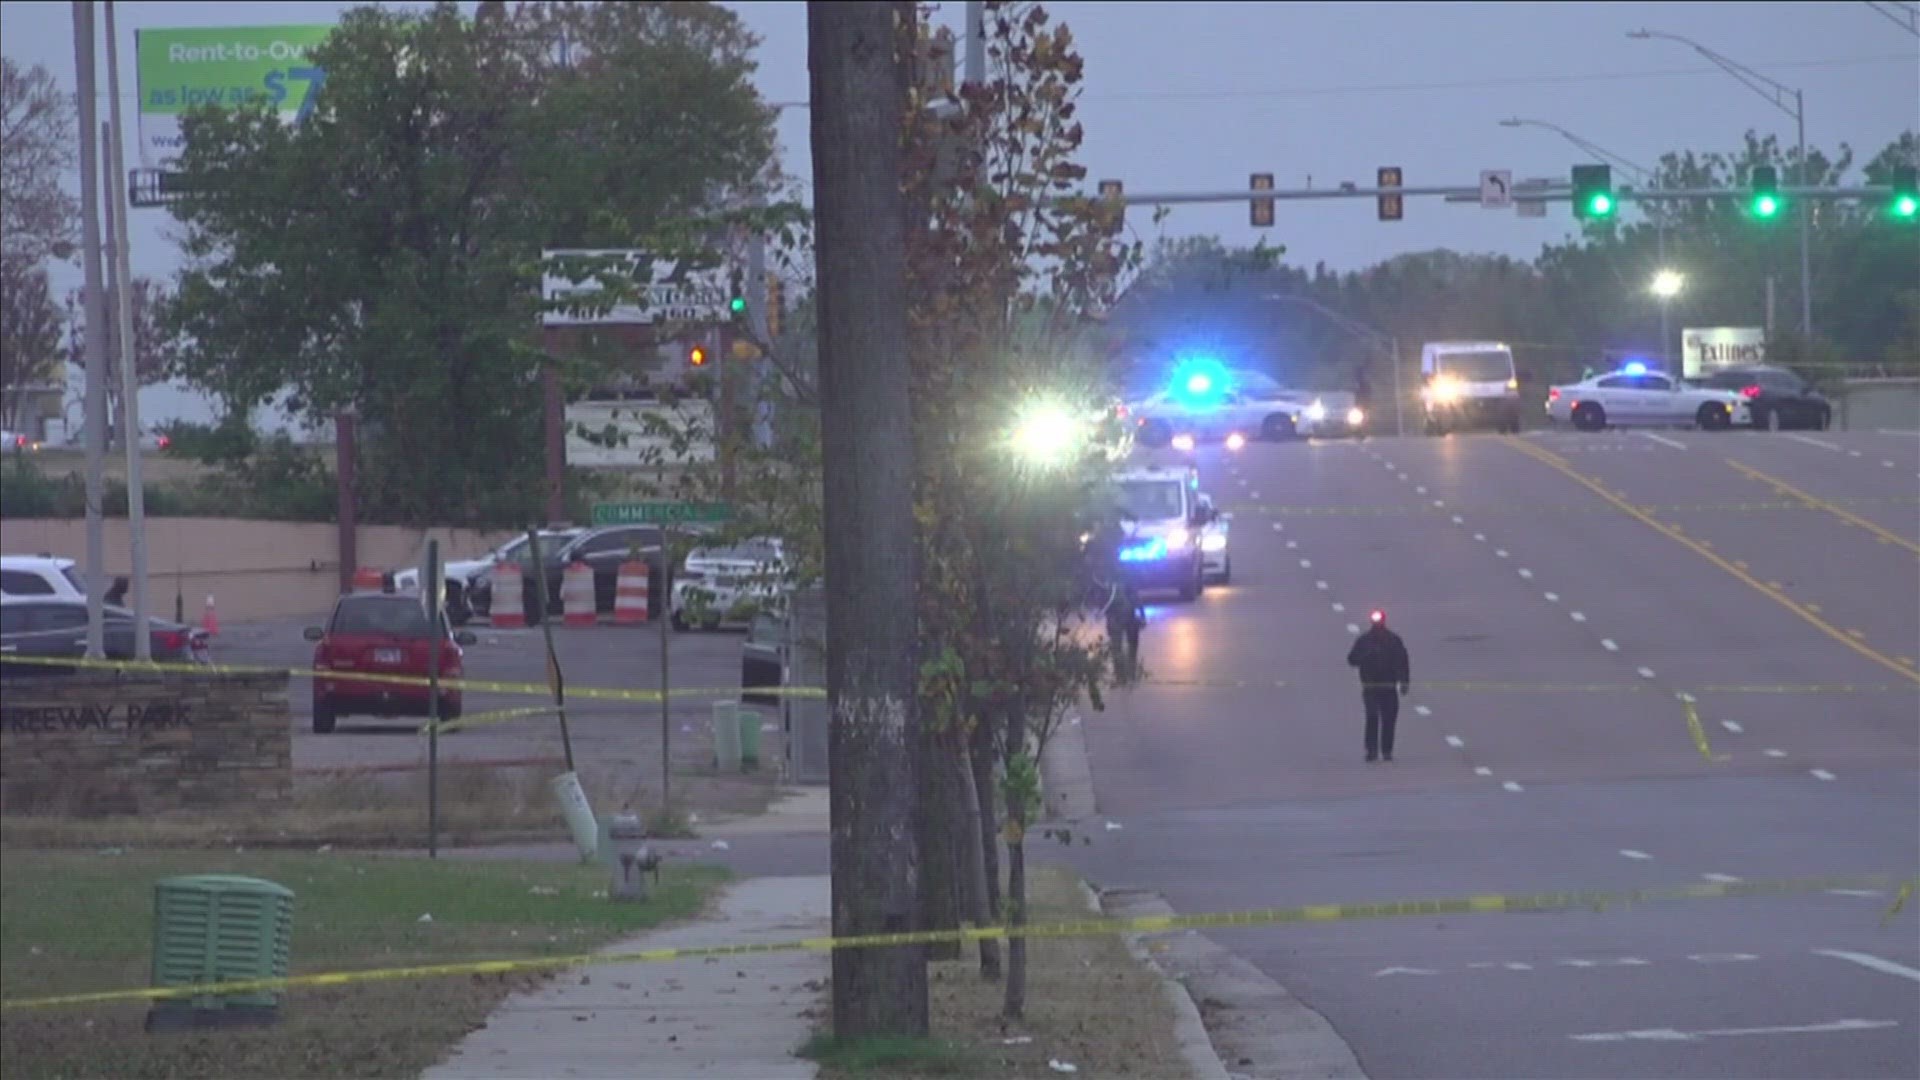 MPD said the shooting took place at the 3200 block of Elvis Presley Boulevard Sunday.